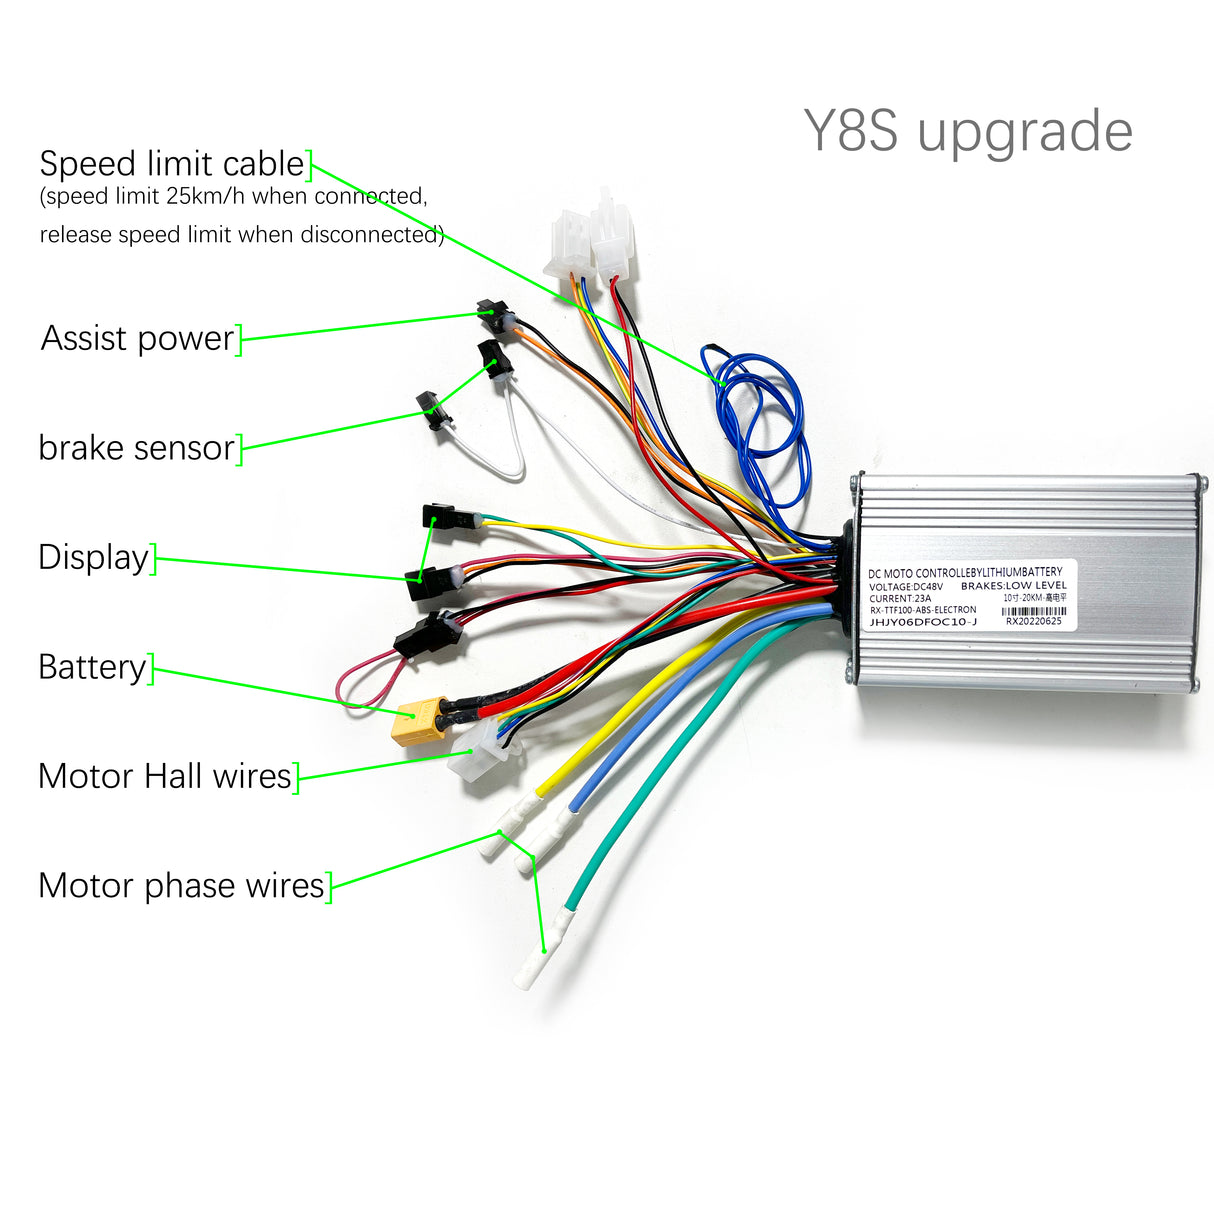 Y8S upgrade speed controller 20km/h up to 40km/h - TODIMART